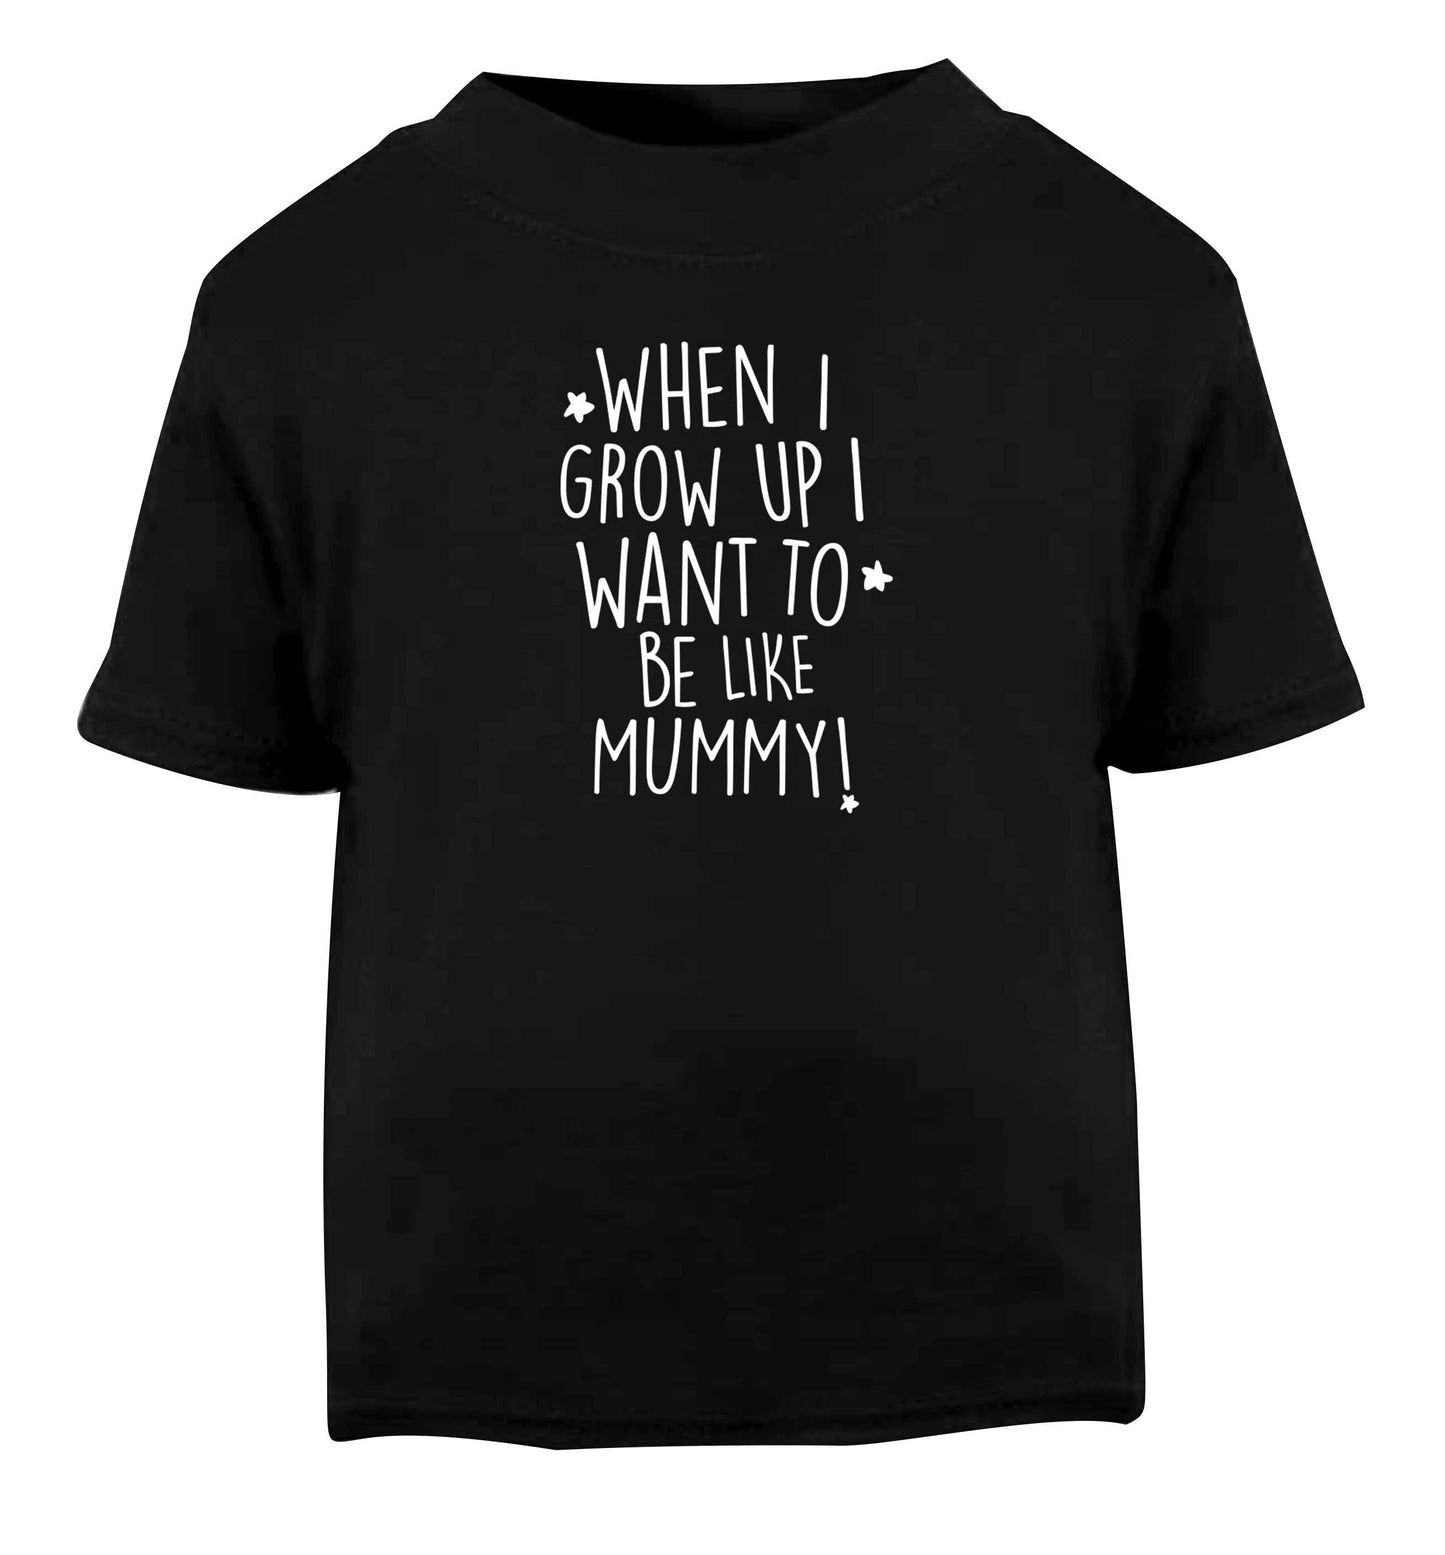 When I grow up I want to be like my mummy Black baby toddler Tshirt 2 years